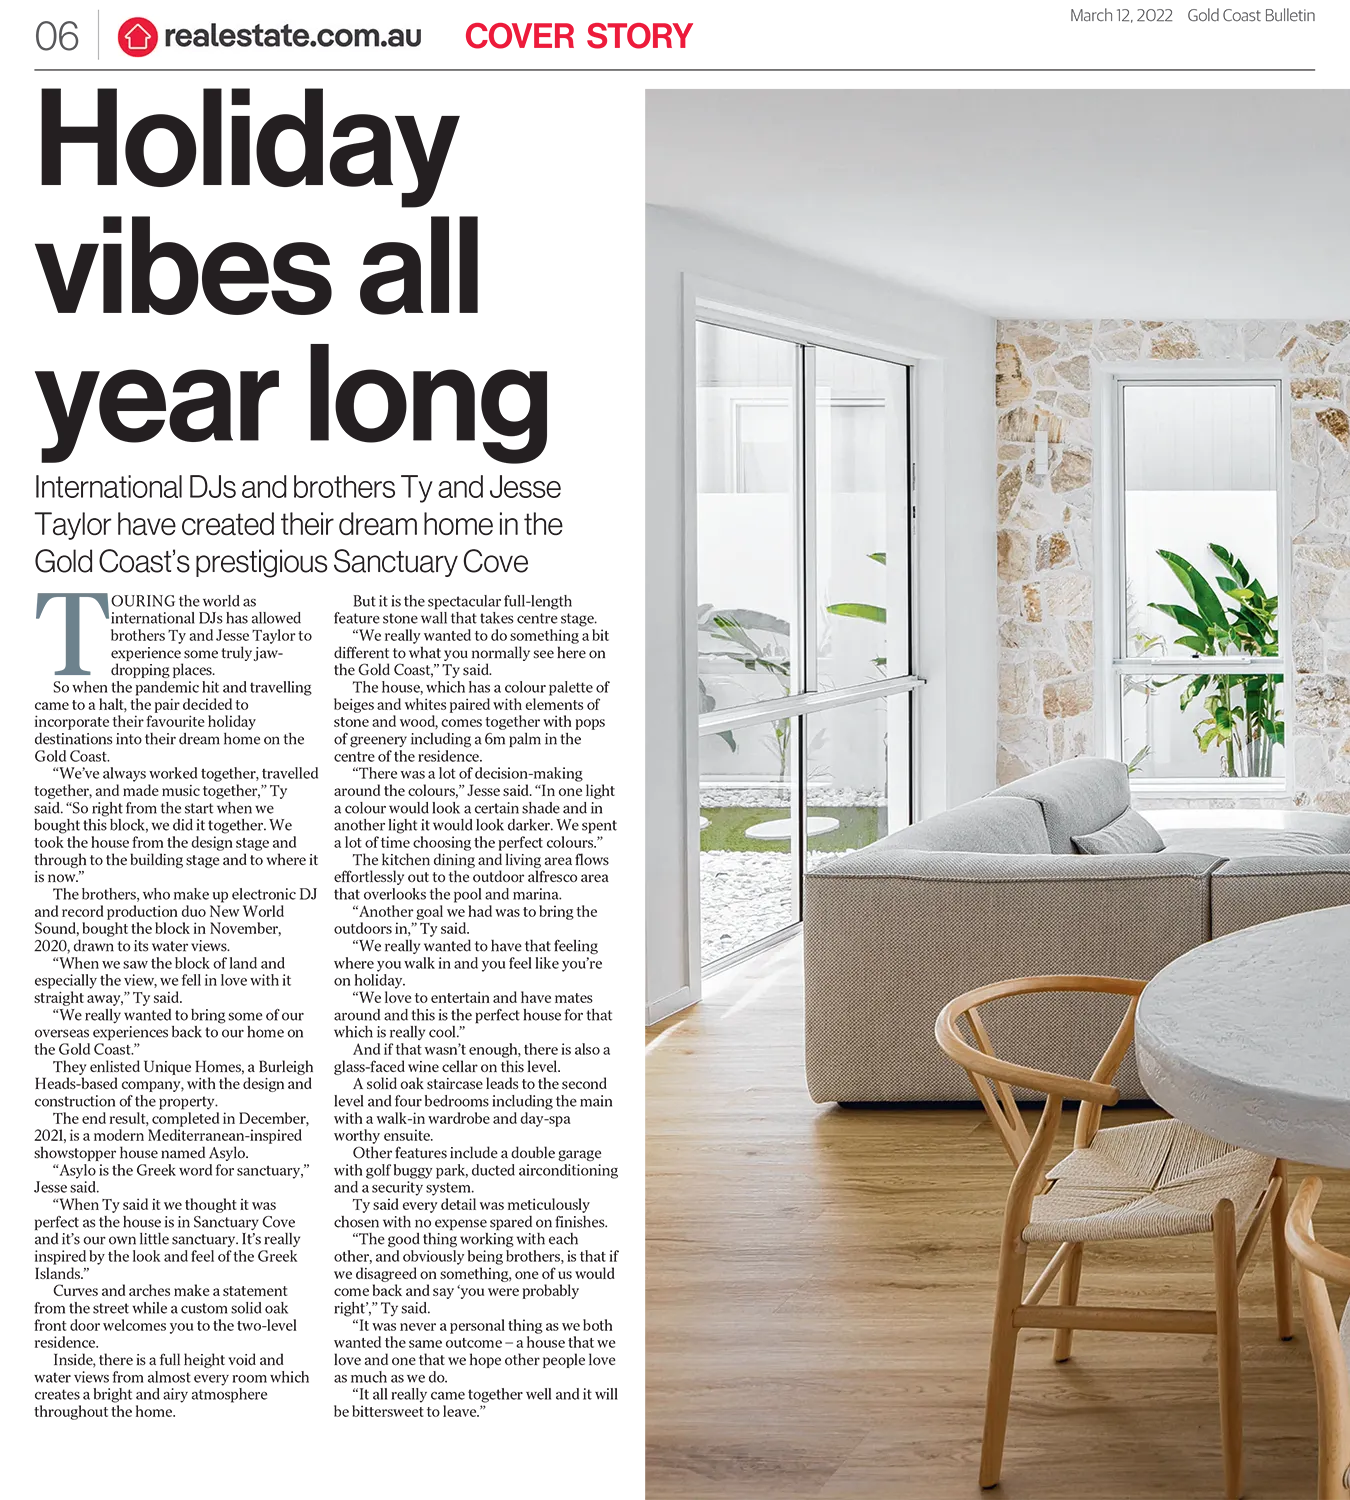 Unique Built Gold Coast In the Press Magazine article about Asylo display home